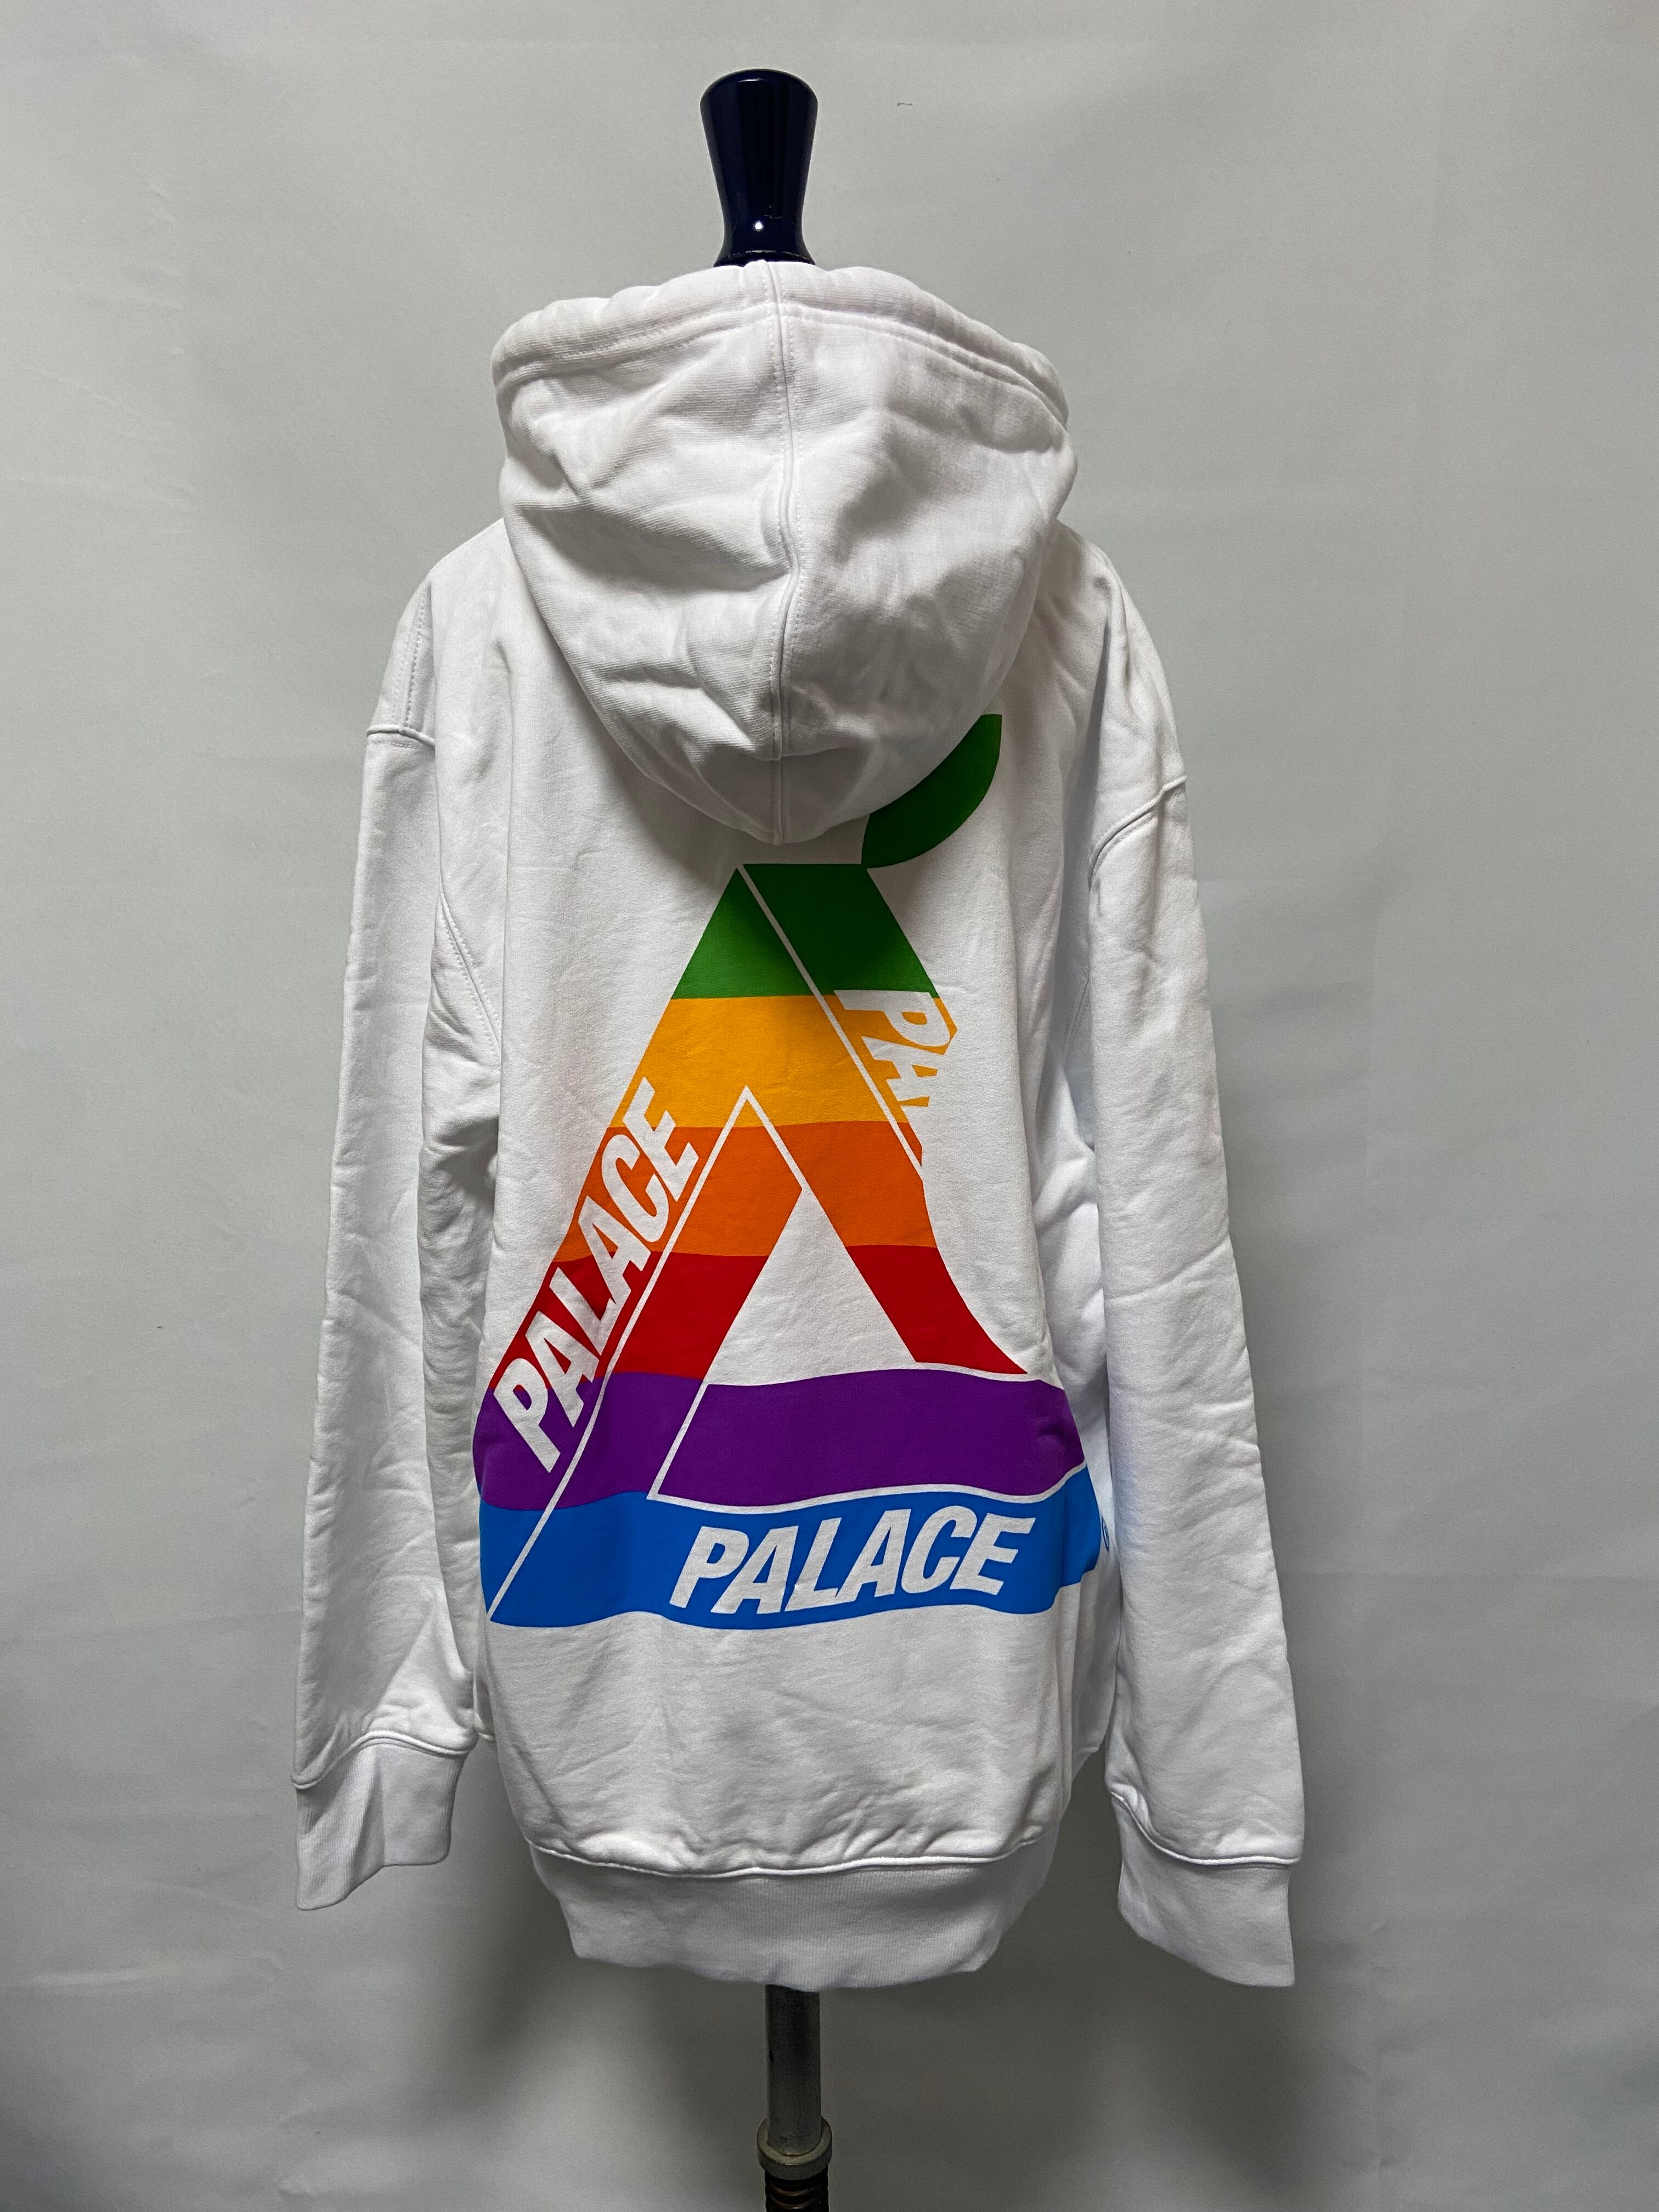 Palace Skateboards Jobsworth Hooded パーカ